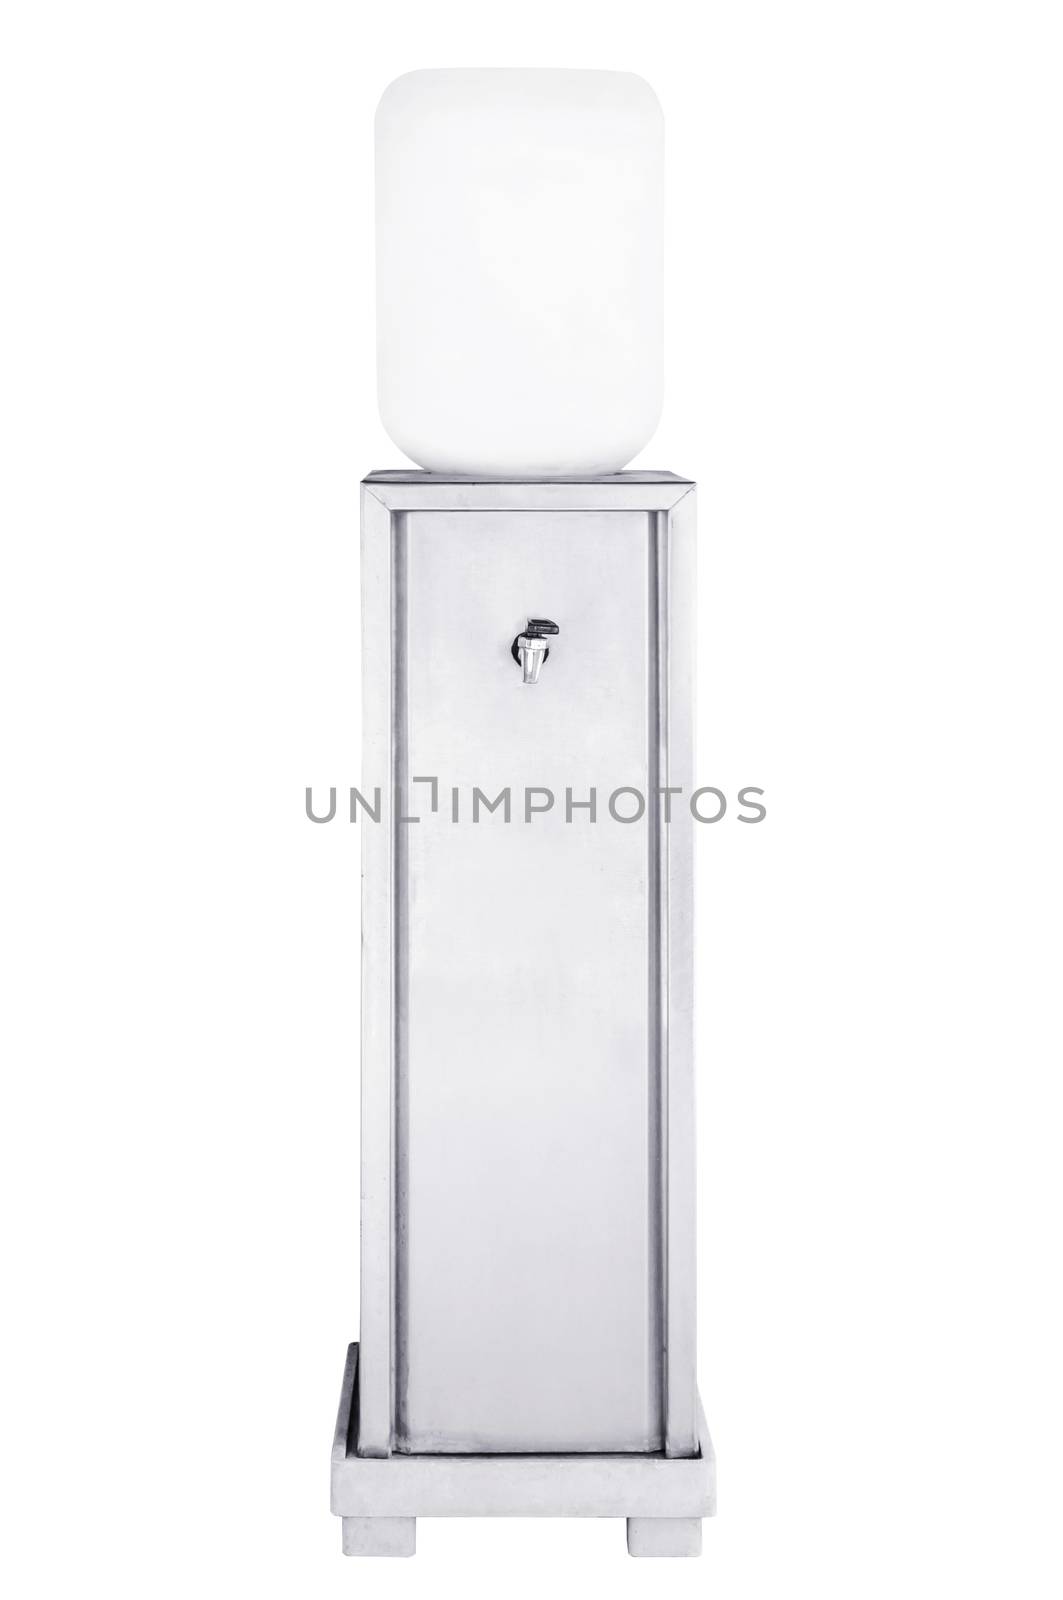 Stainless water cooler by NuwatPhoto